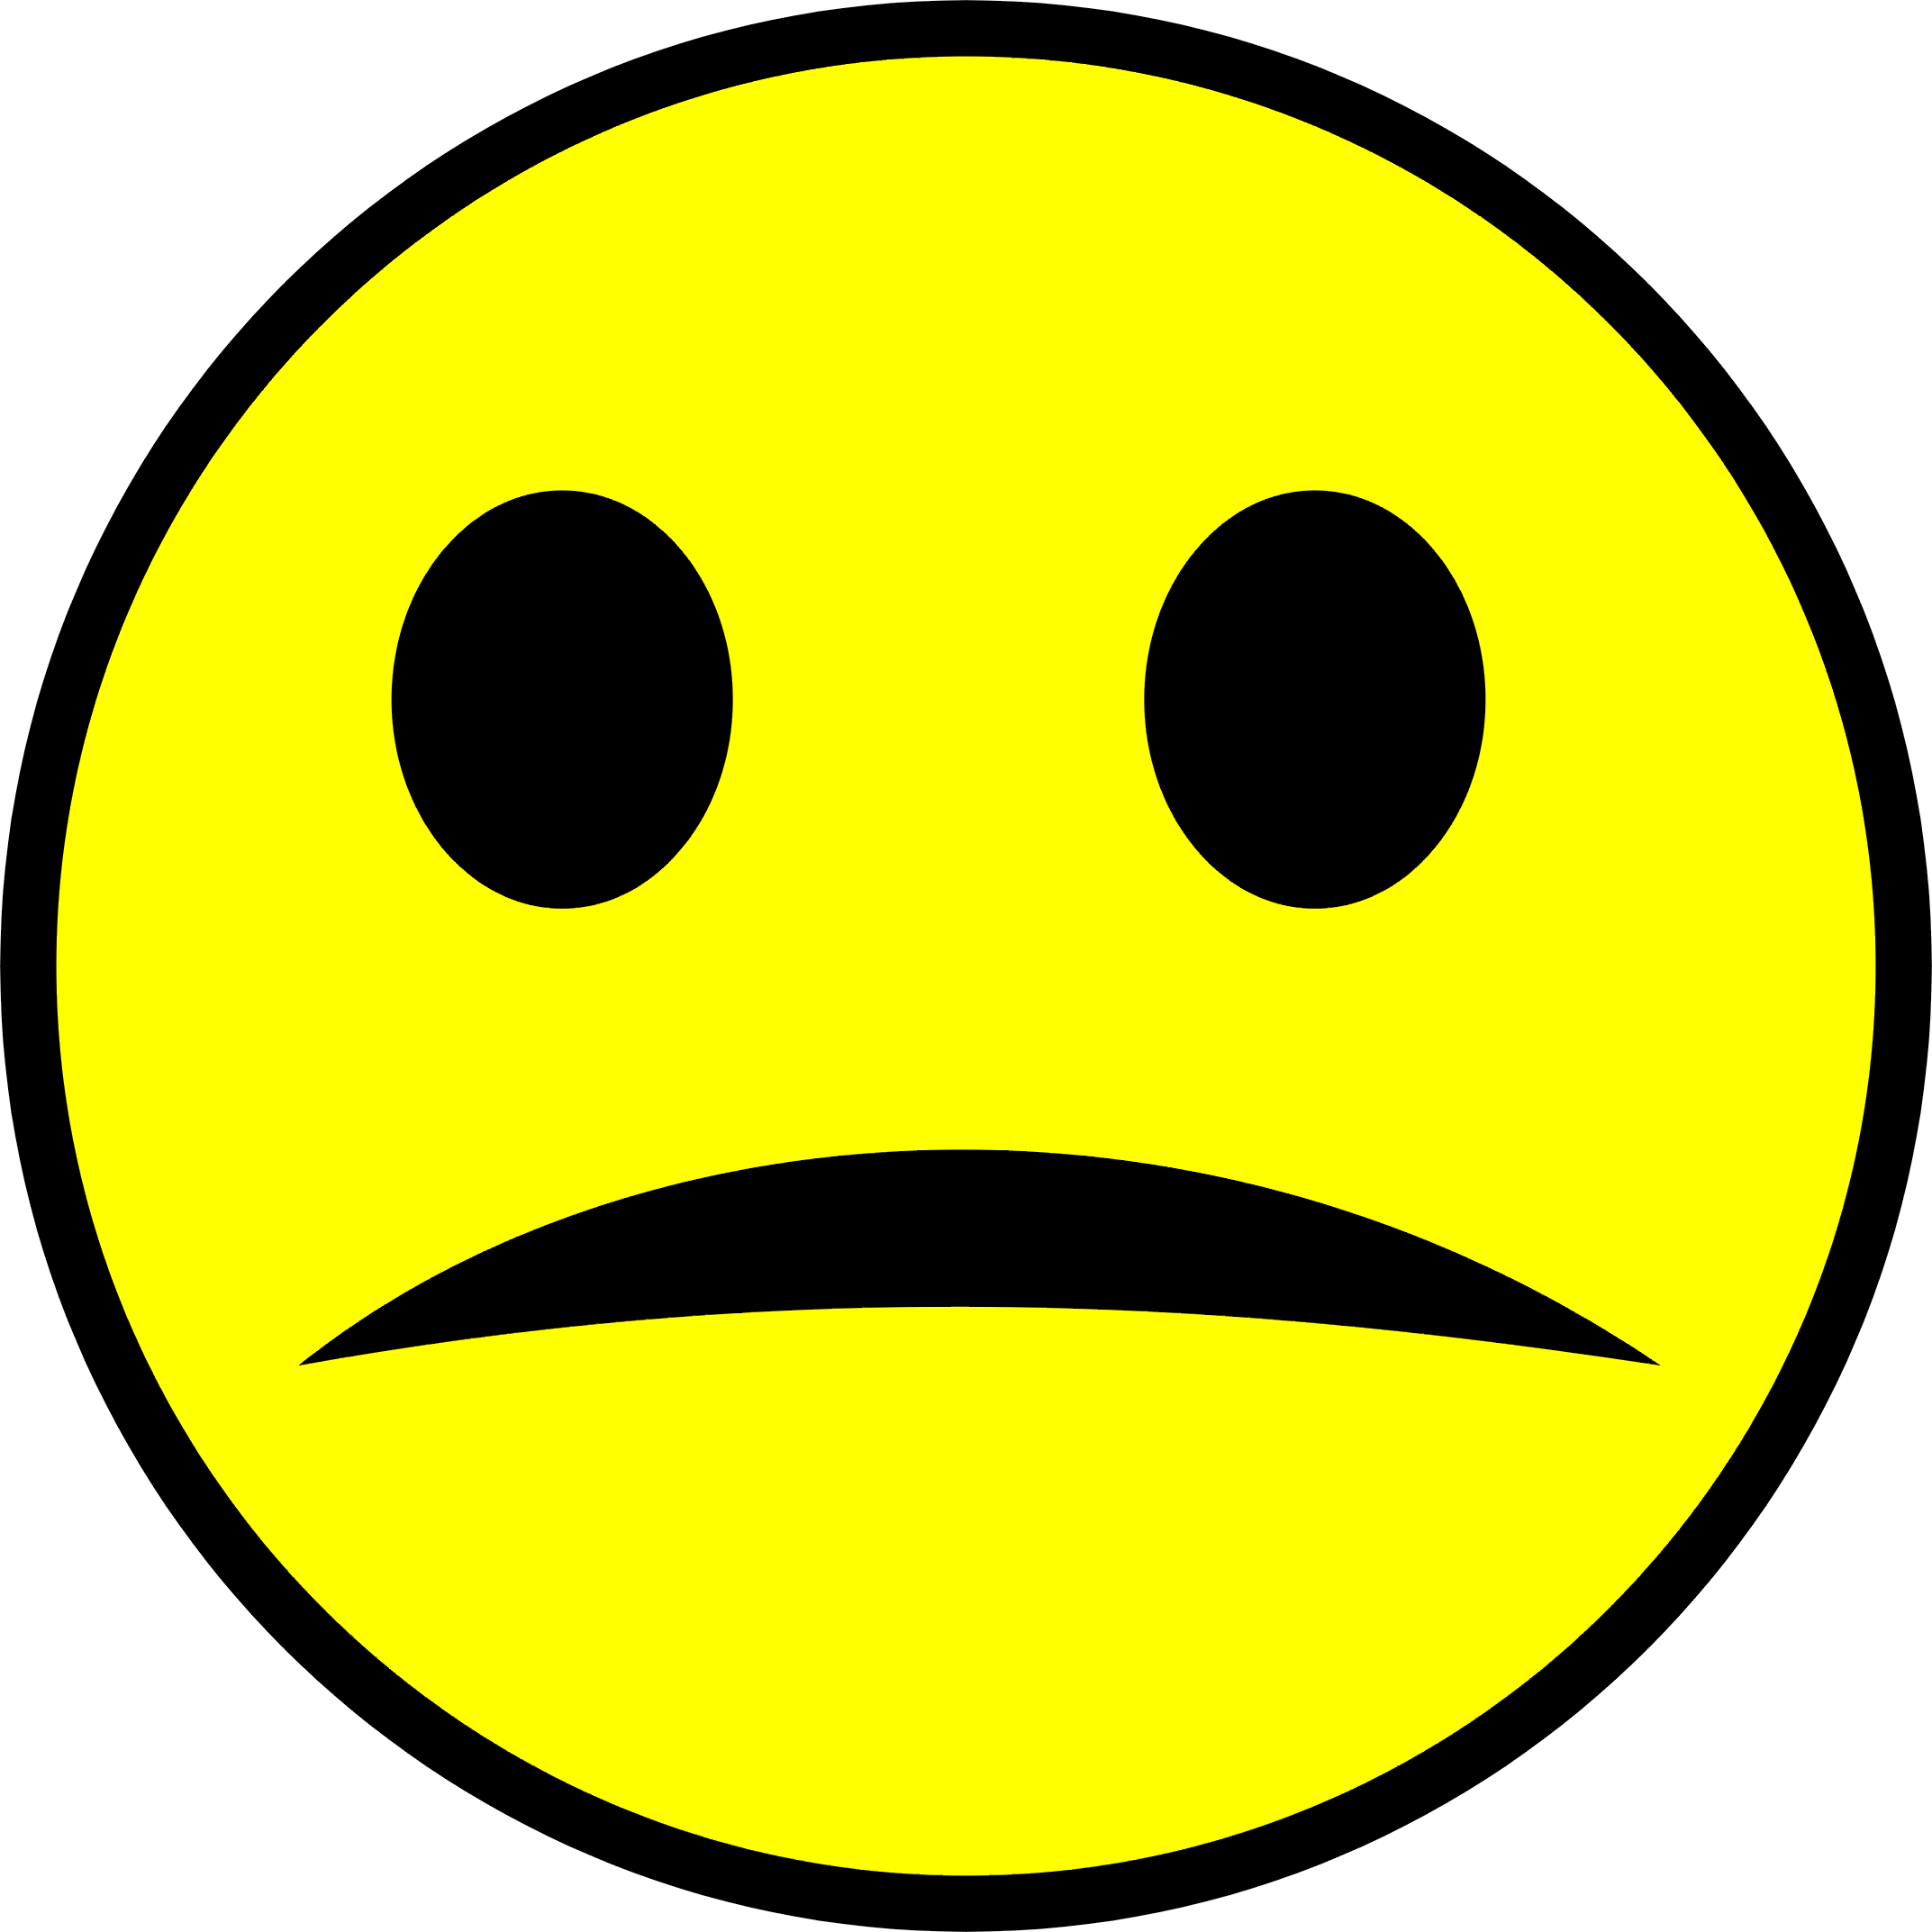 Smiley And Sad Faces Clip Art - Clipart library